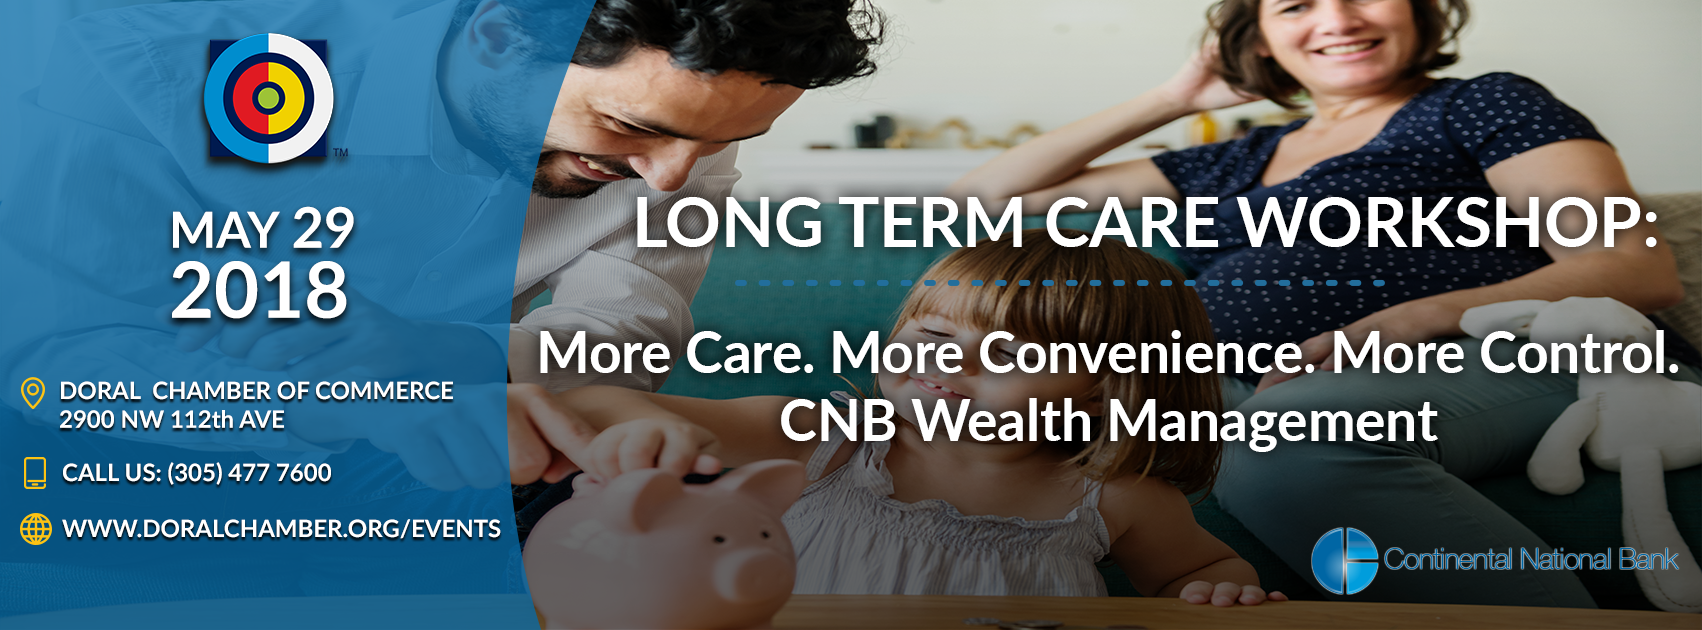 Long Term Care Workshop  CNB Wealth Management, Miami-Dade, Florida, United States